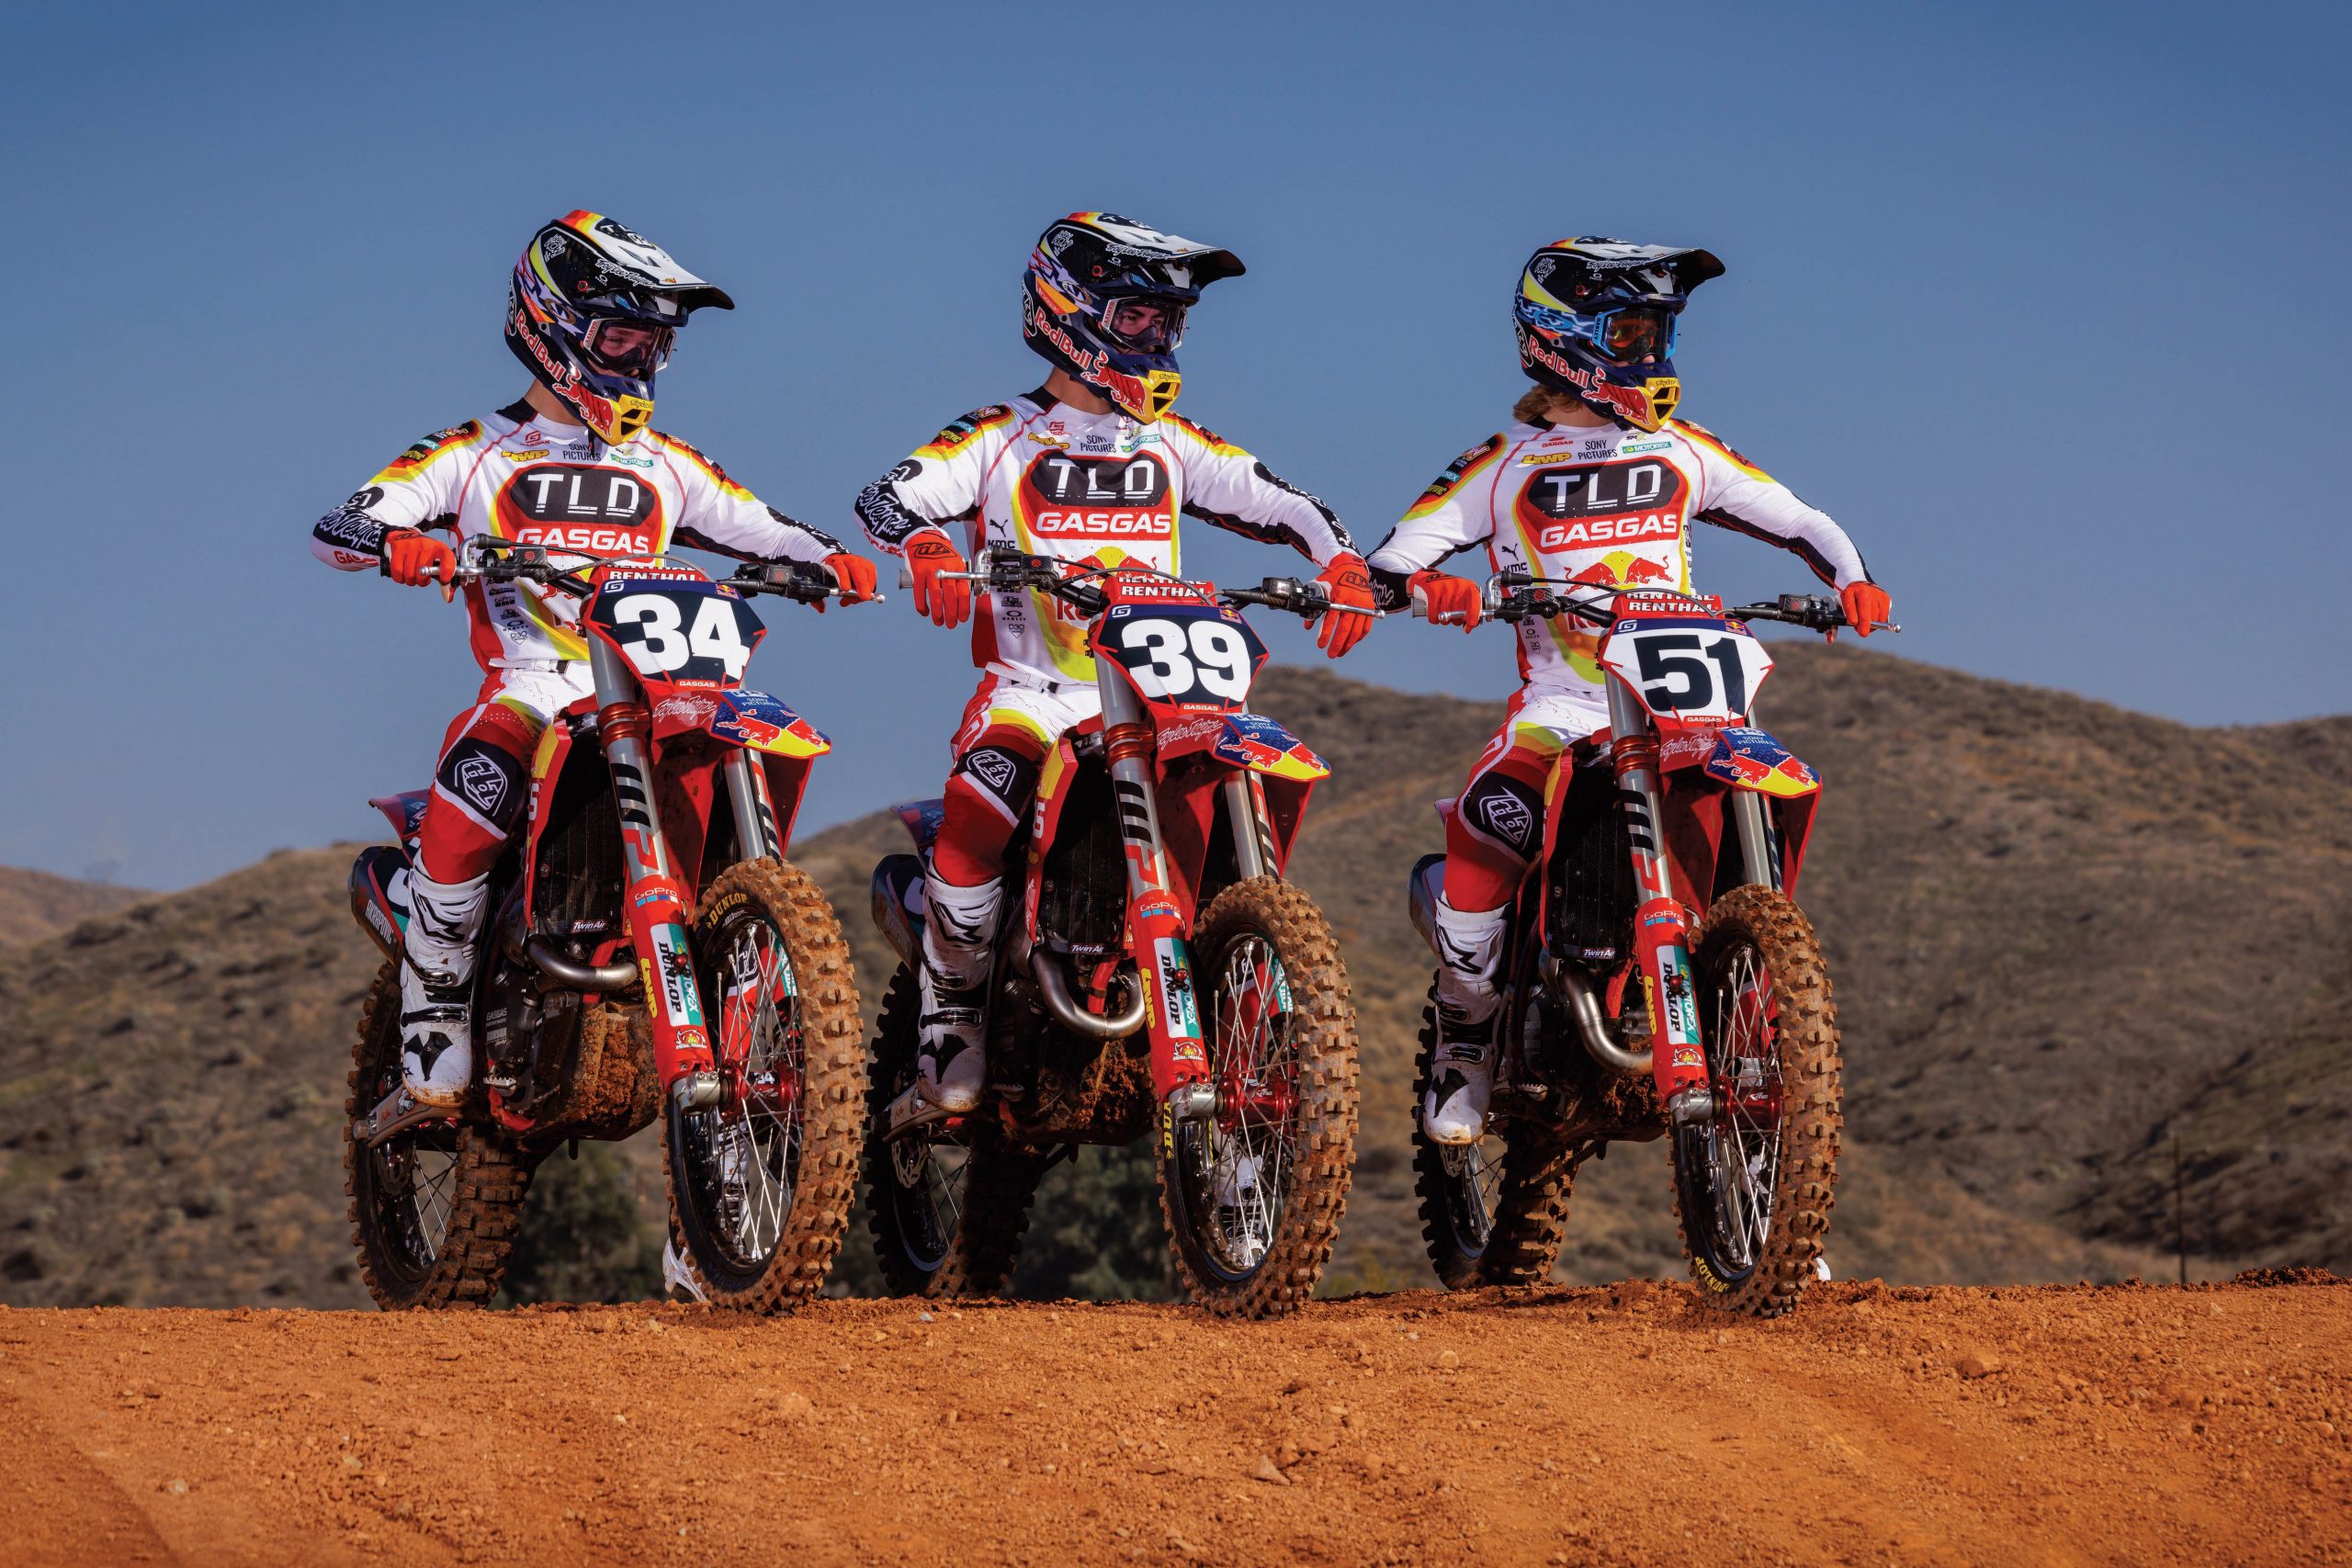 Troy Lee Designs/Red Bull/GASGAS Factory Racing taking things outdoors with a three rider lineup in AMA Pro Motocross